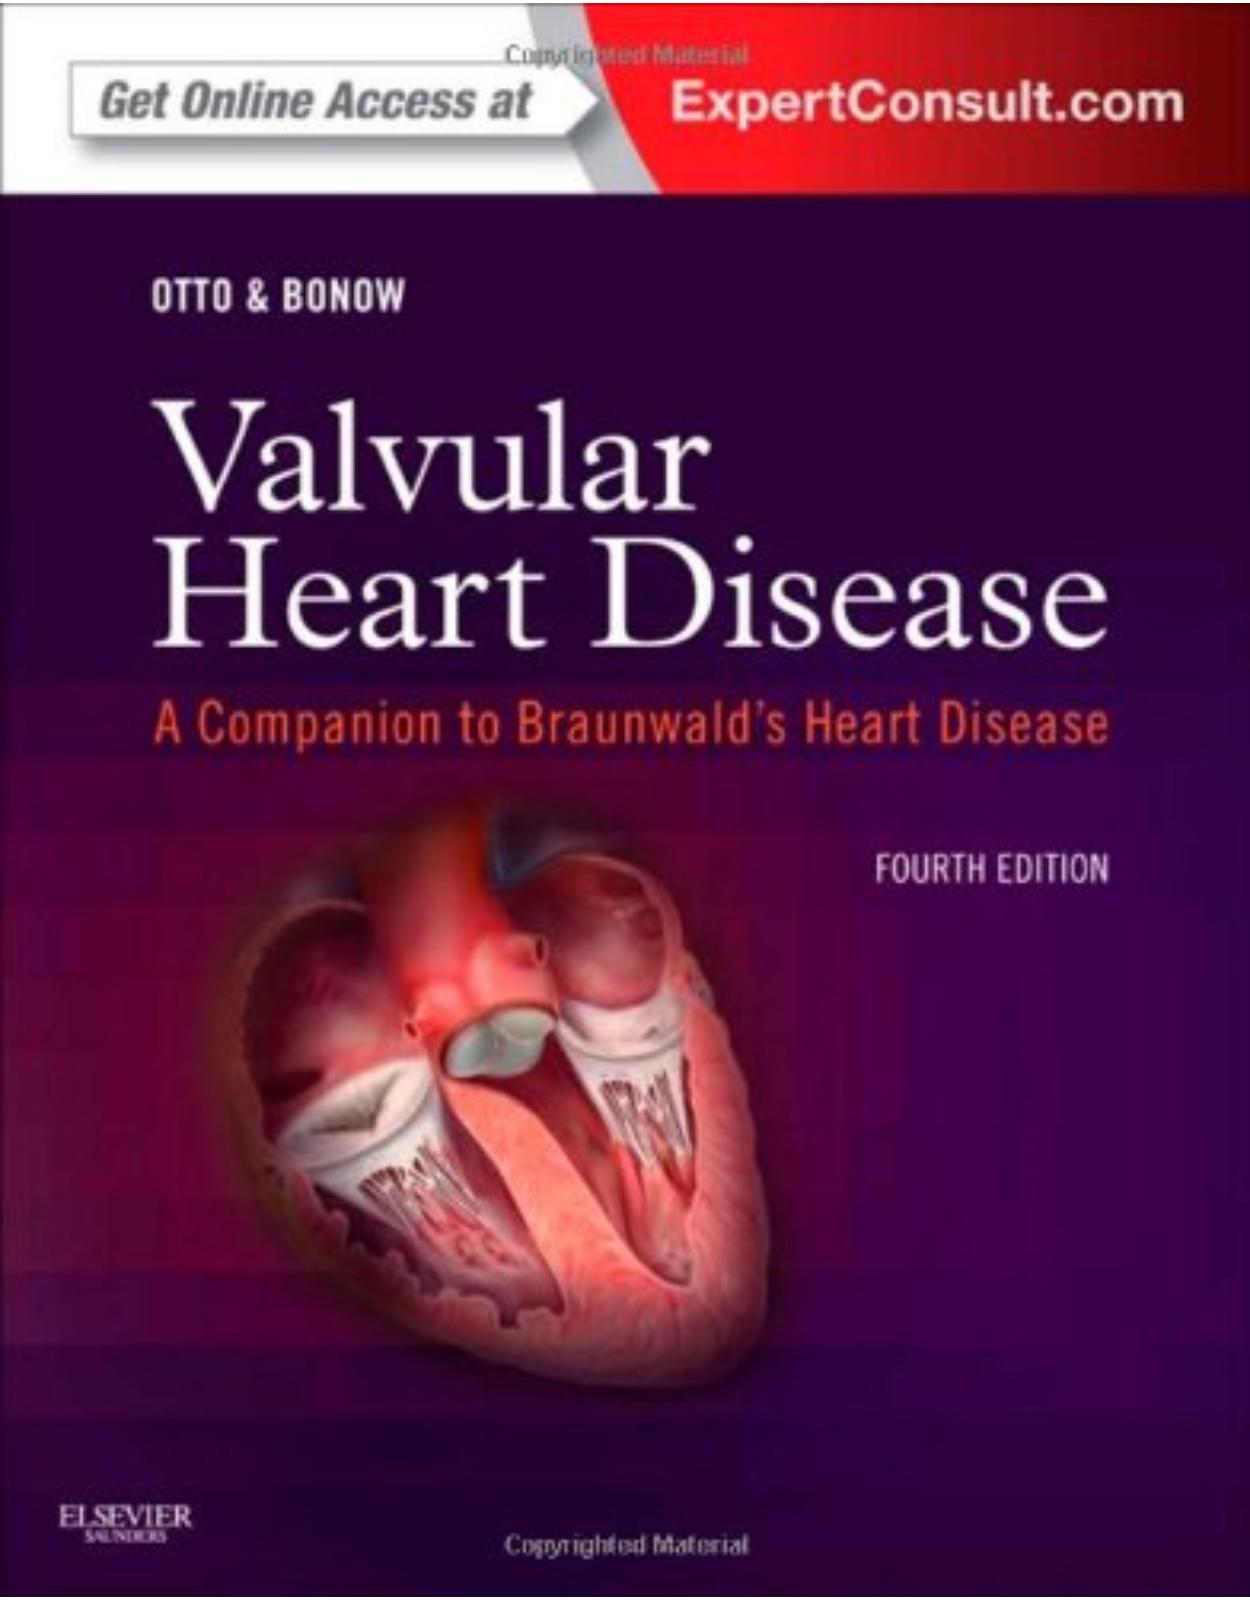 Valvular Heart Disease: A Companion to Braunwald's Heart Disease: Expert Consult - Online and Print, 4e